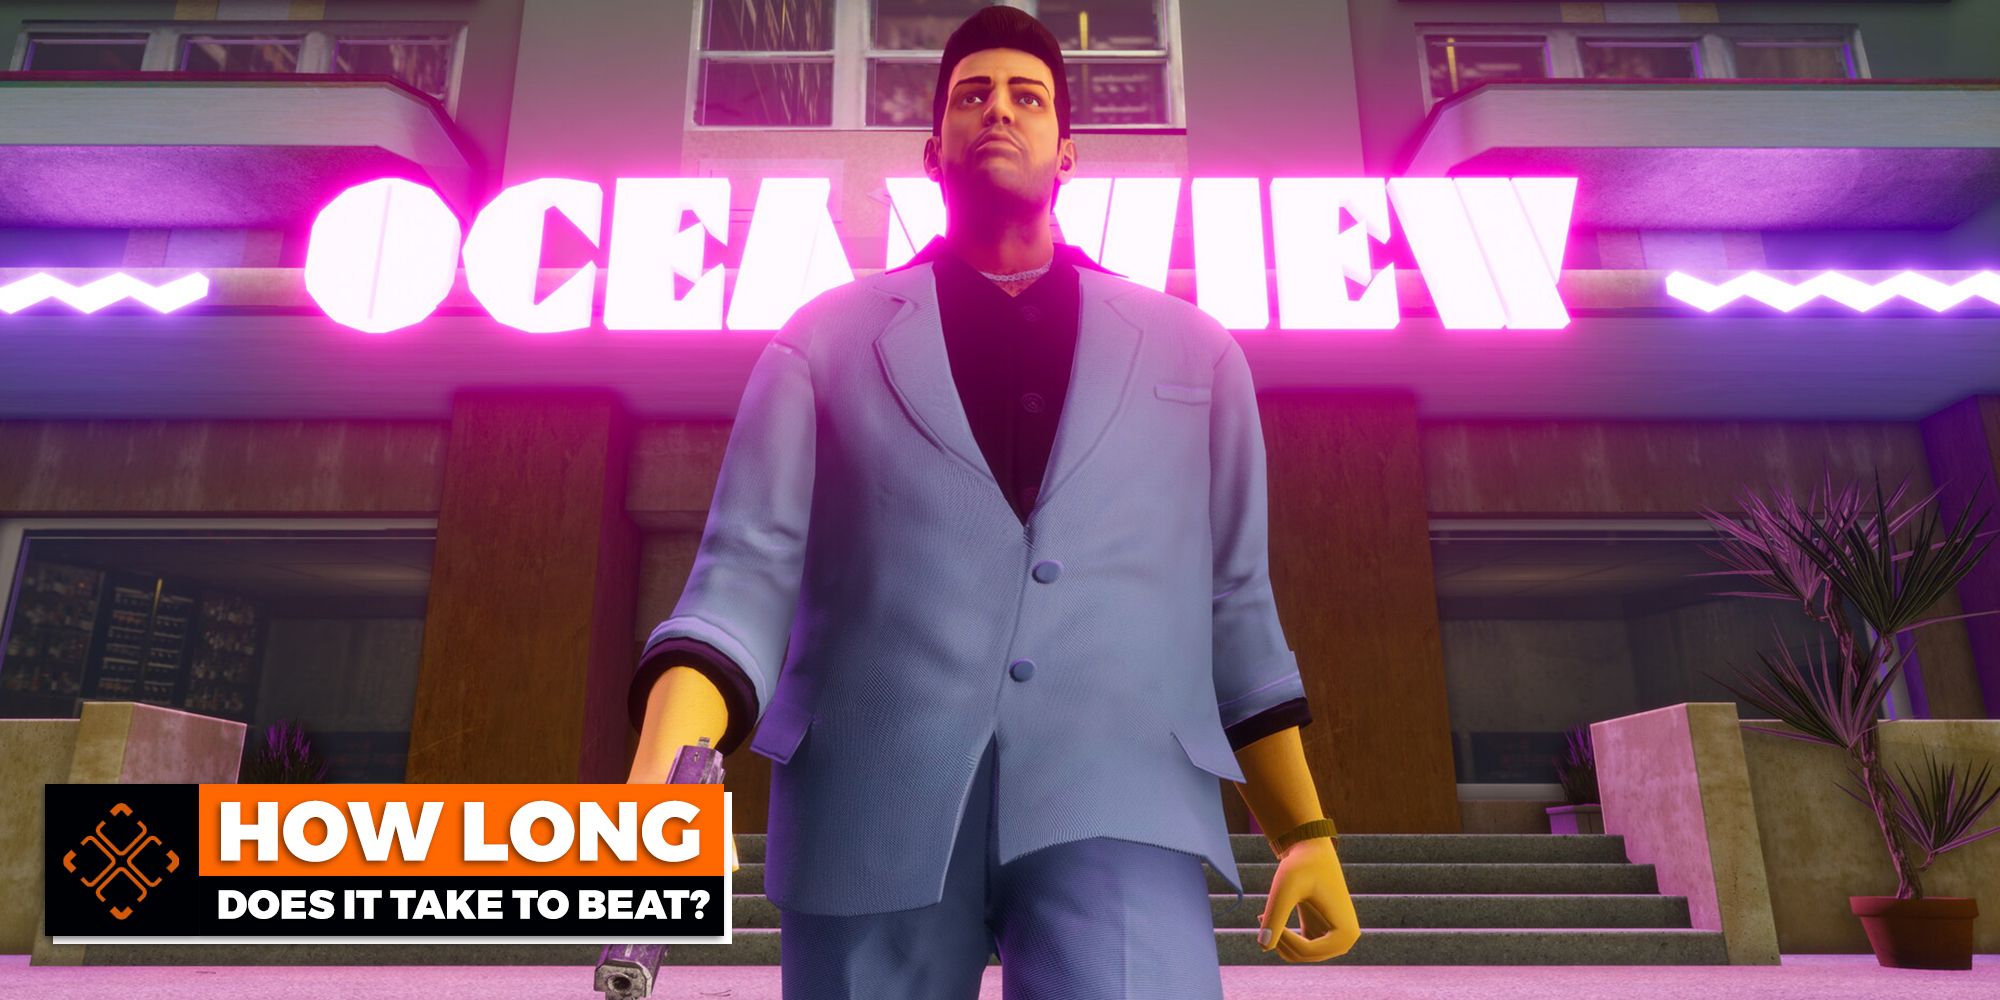 Game screen from Grand Theft Auto Vice City.